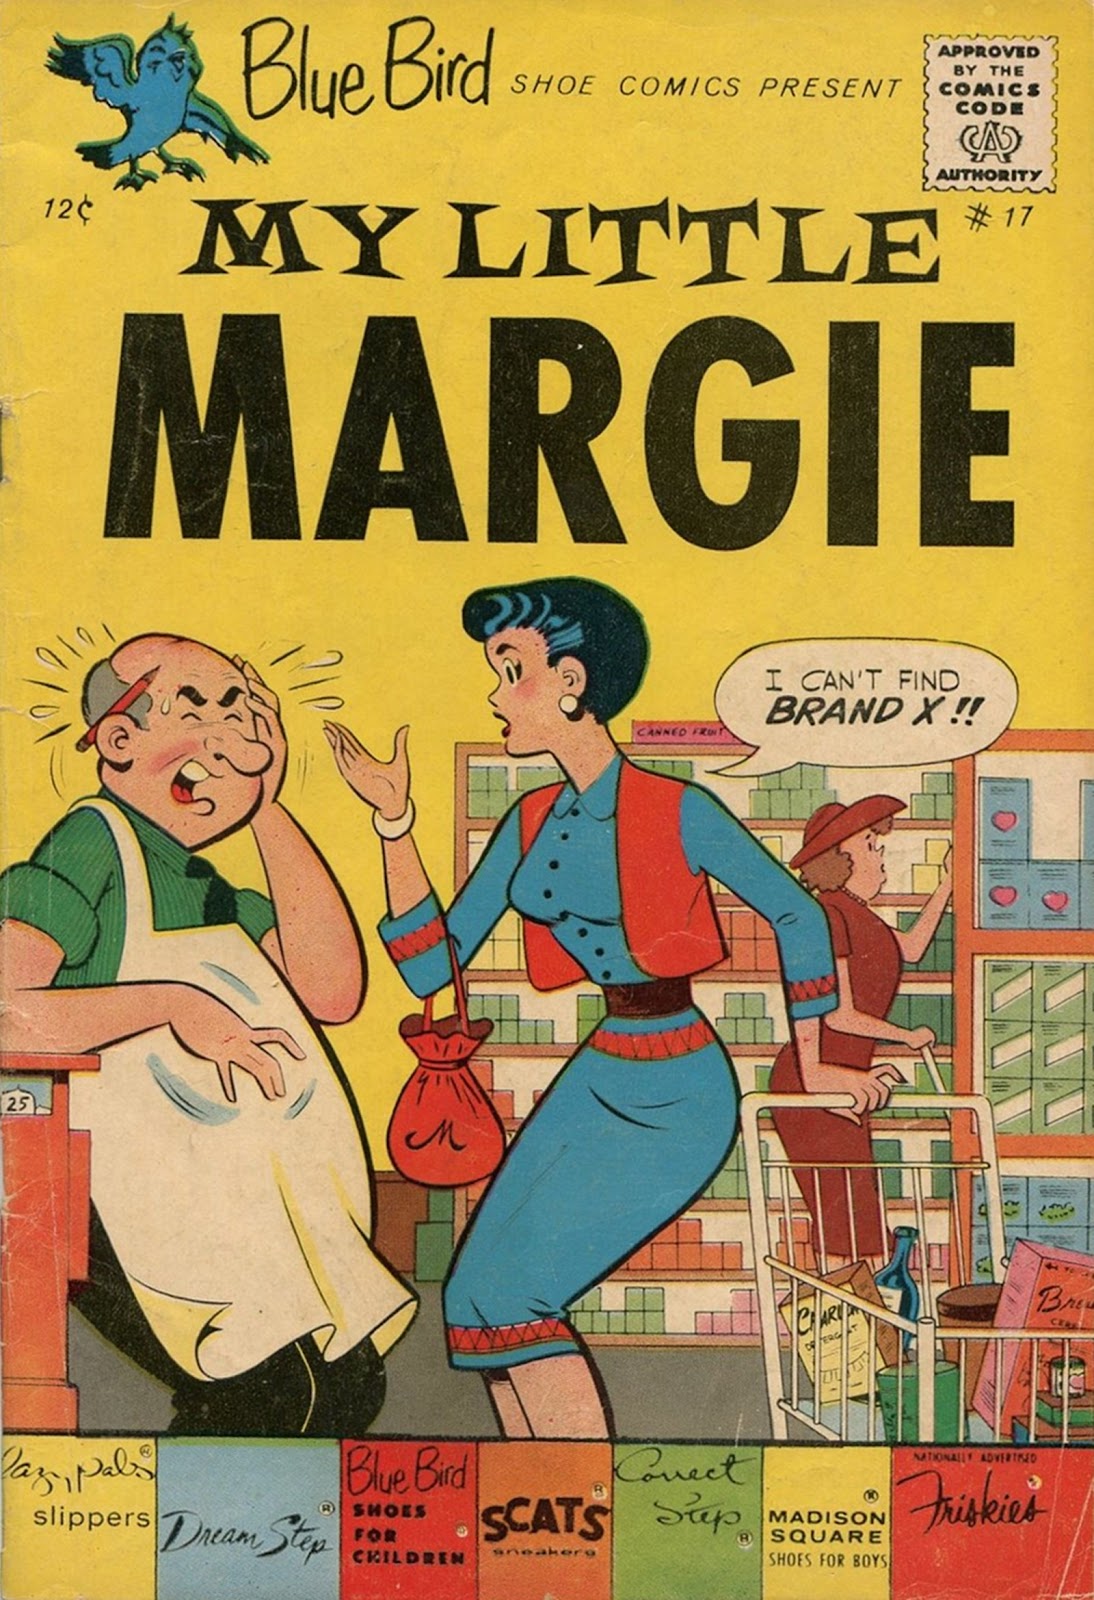 My Little Margie (1963) Full Page 1